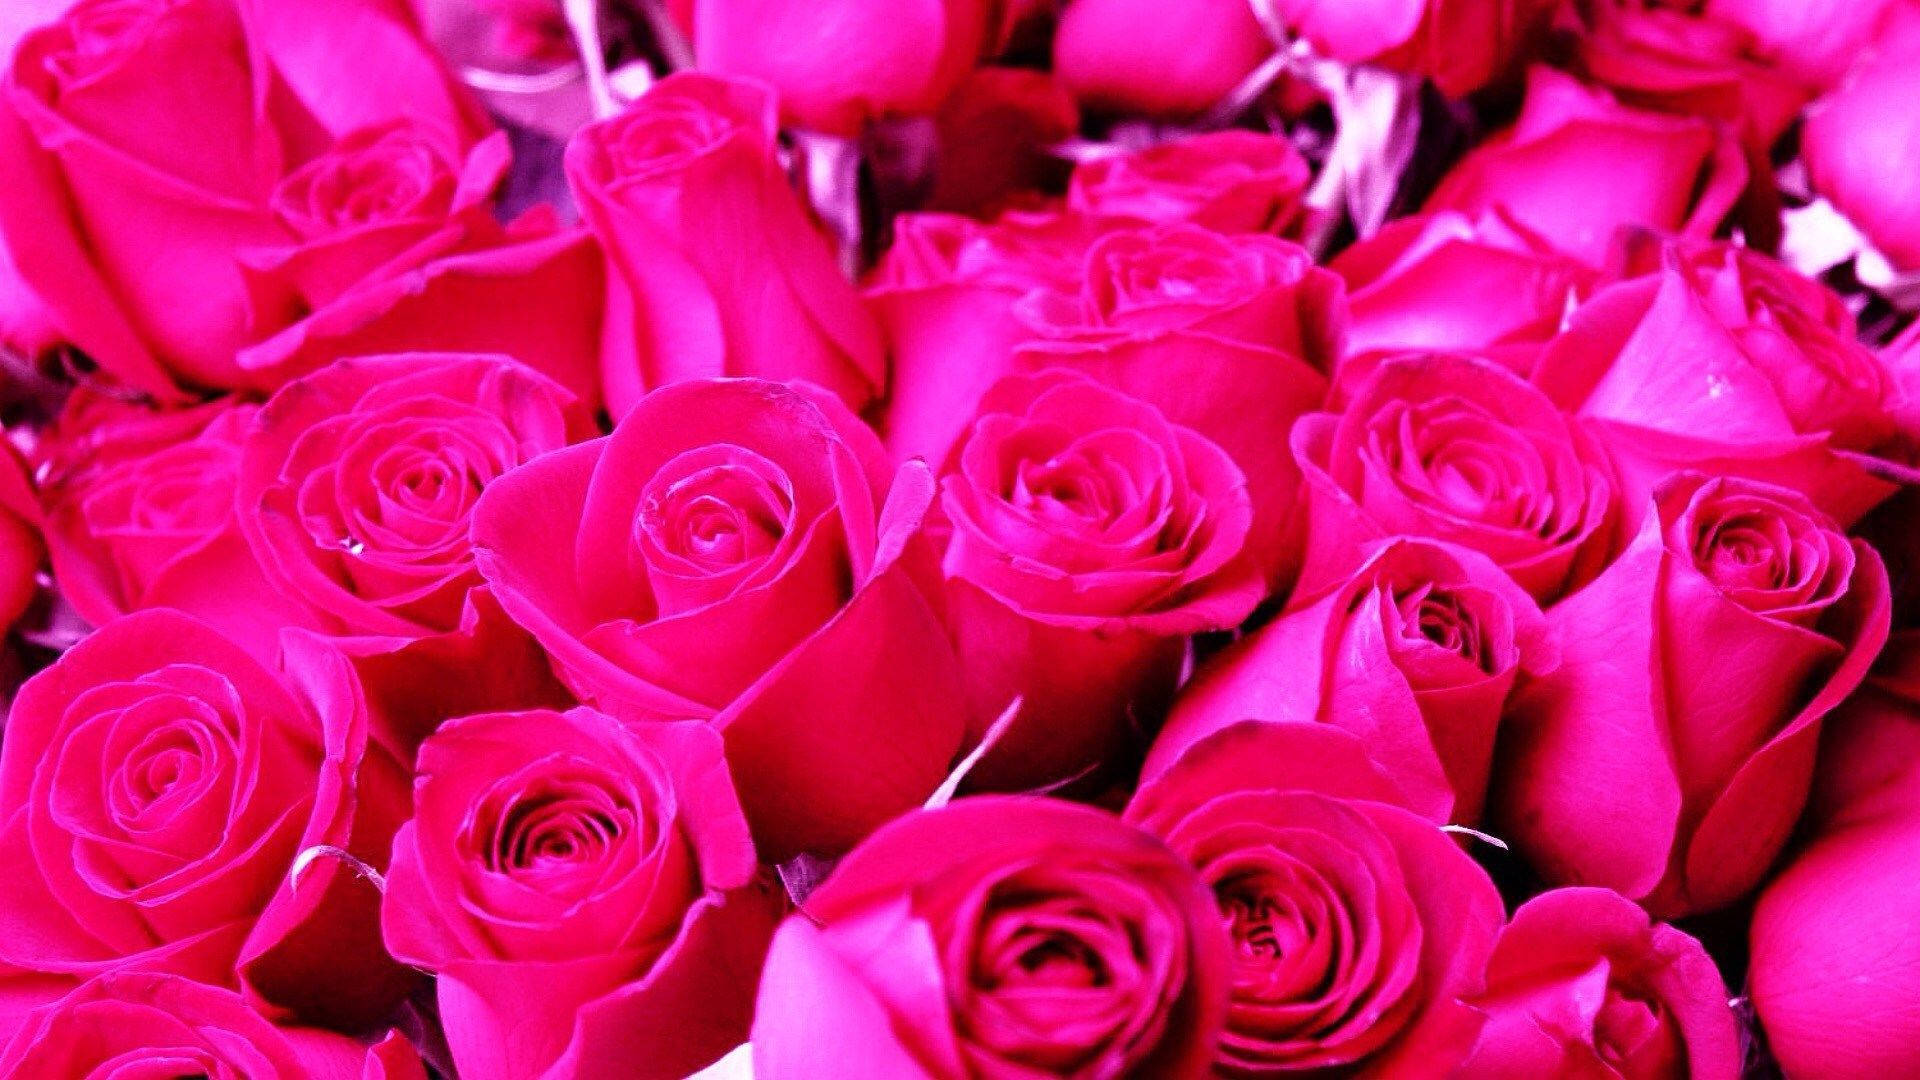 Hot Pink Lovely Roses Background